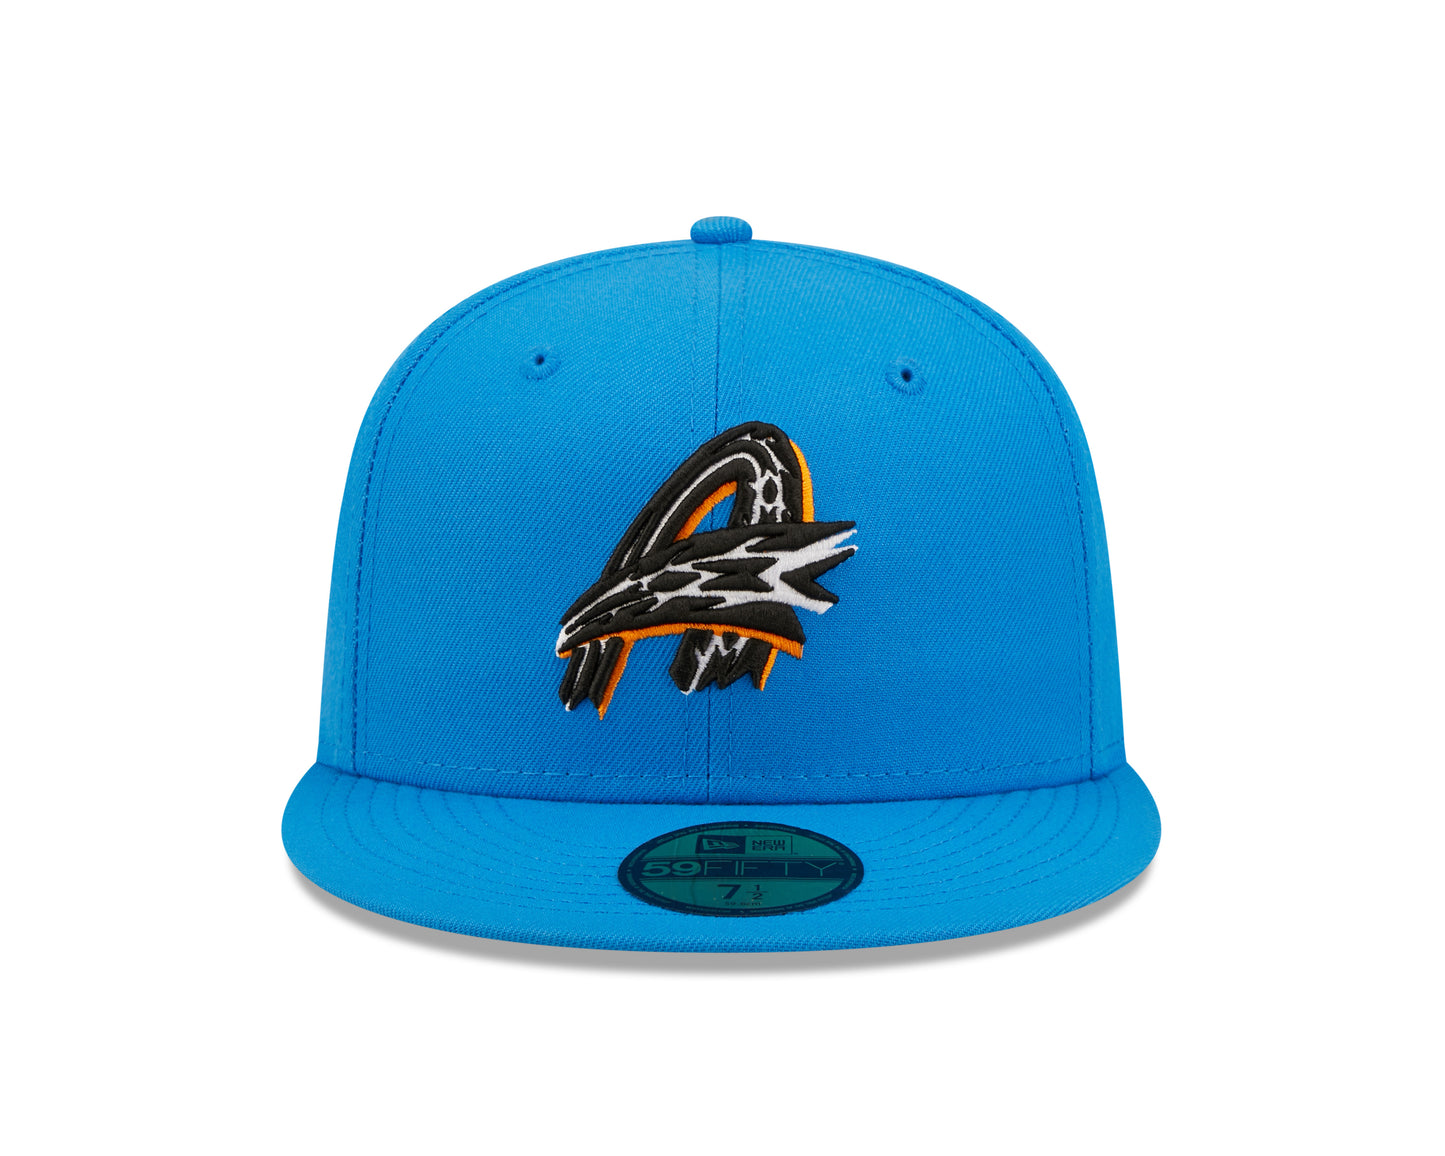 New Era - 59fifty Fitted - MiLB - AC Perf - Akron Rubber Ducks - Blue - Headz Up 